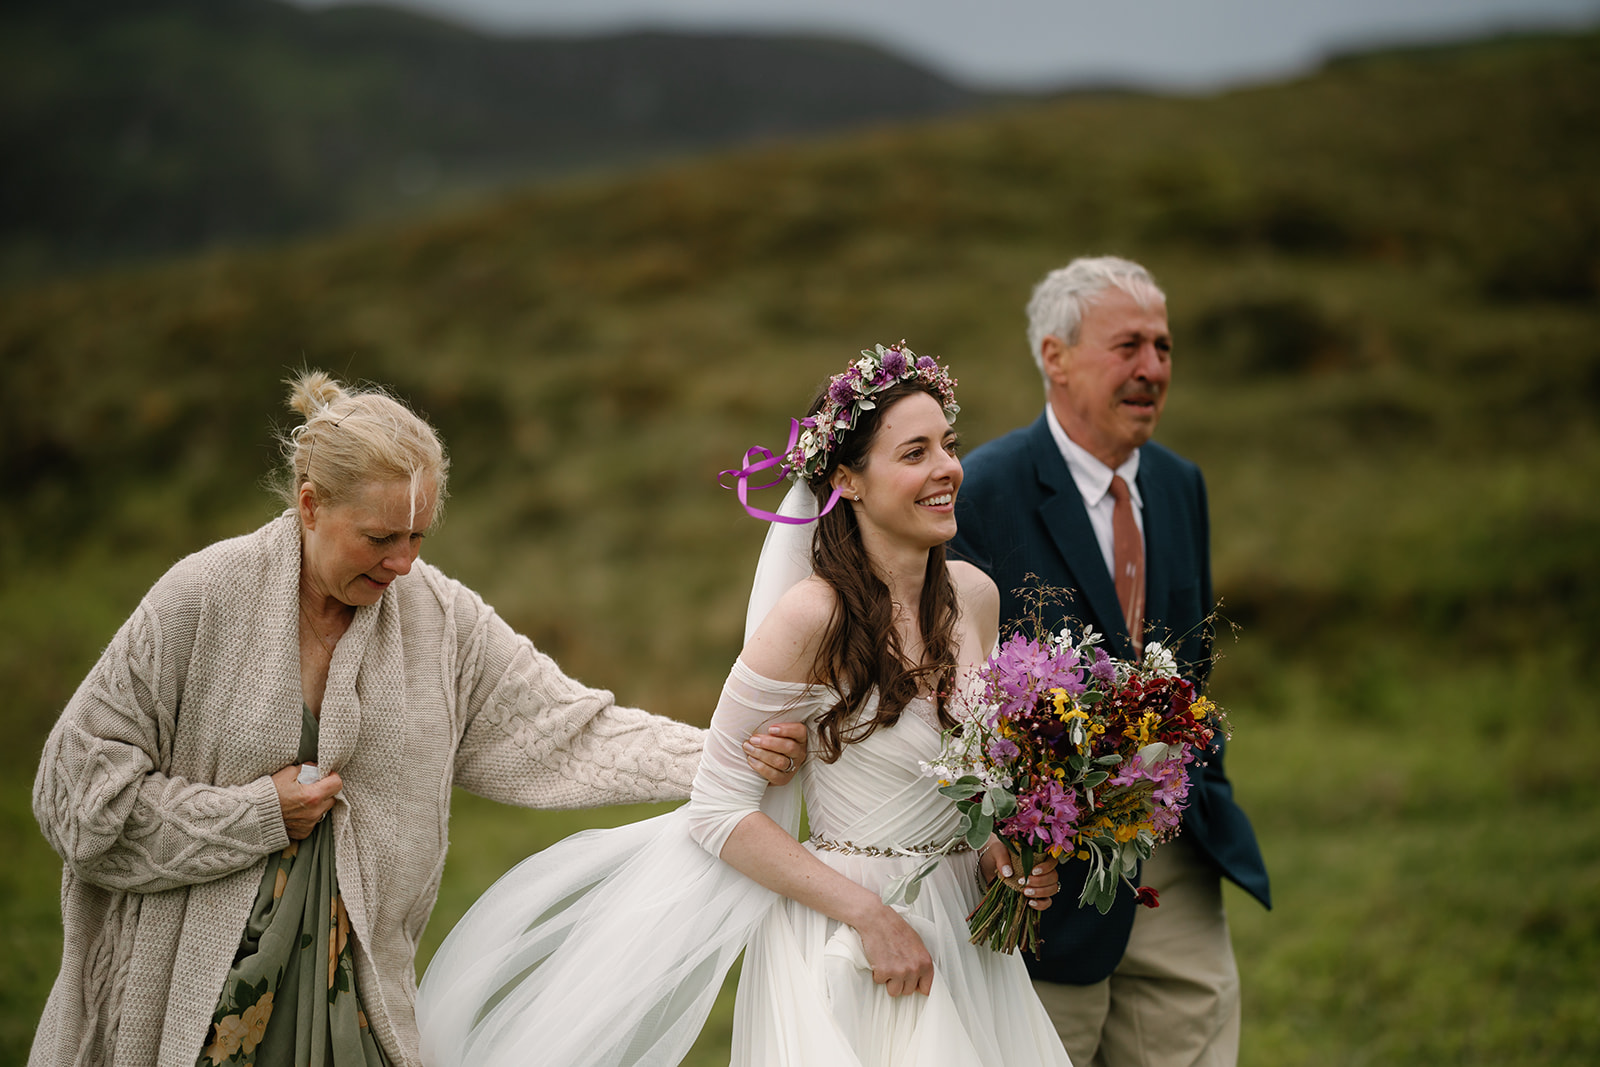 Becca and her parents, accompanied by the melodic notes of a bagpipe, walk toward the ceremony spot at the Isle of Skye